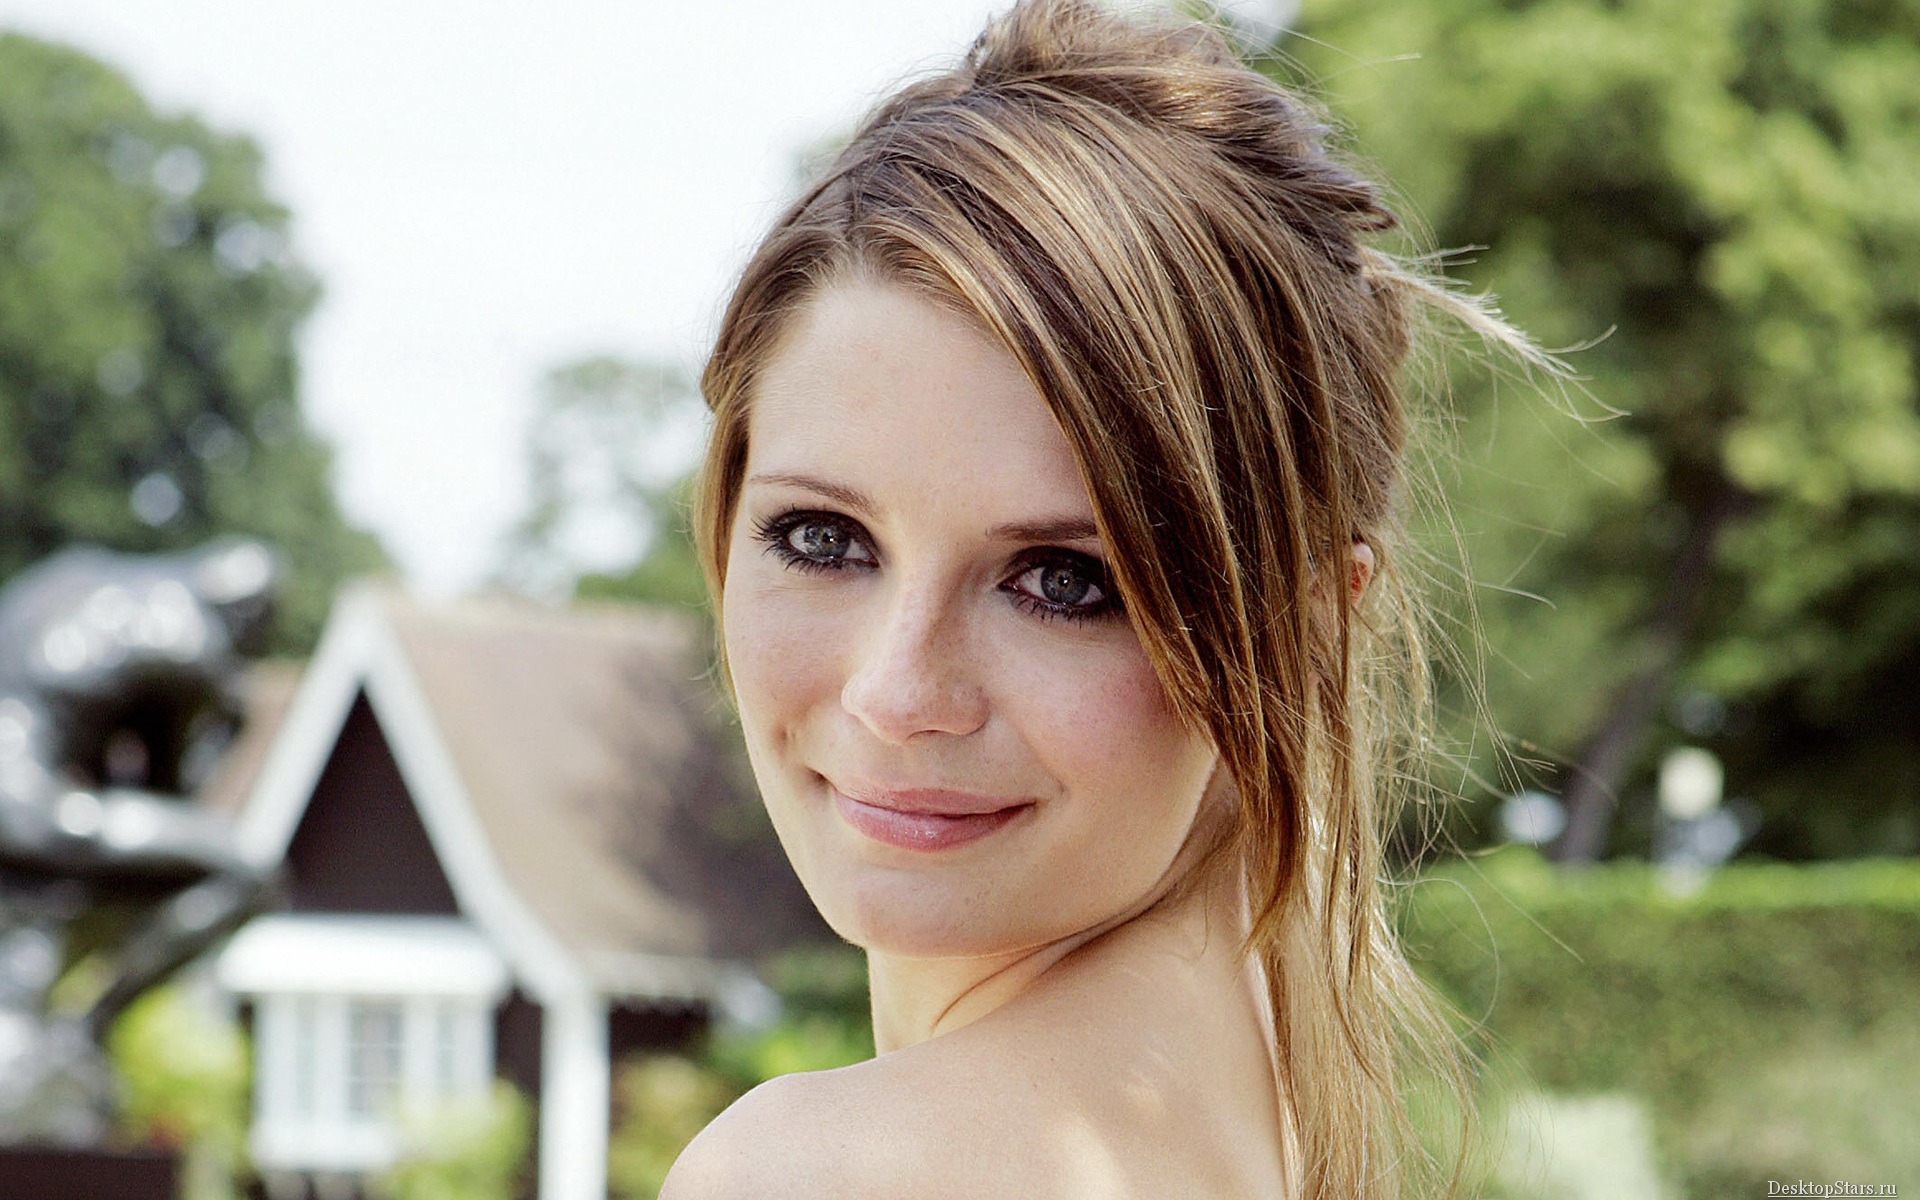 Mischa Barton #021 - 1920x1200 Wallpapers Pictures Photos Images